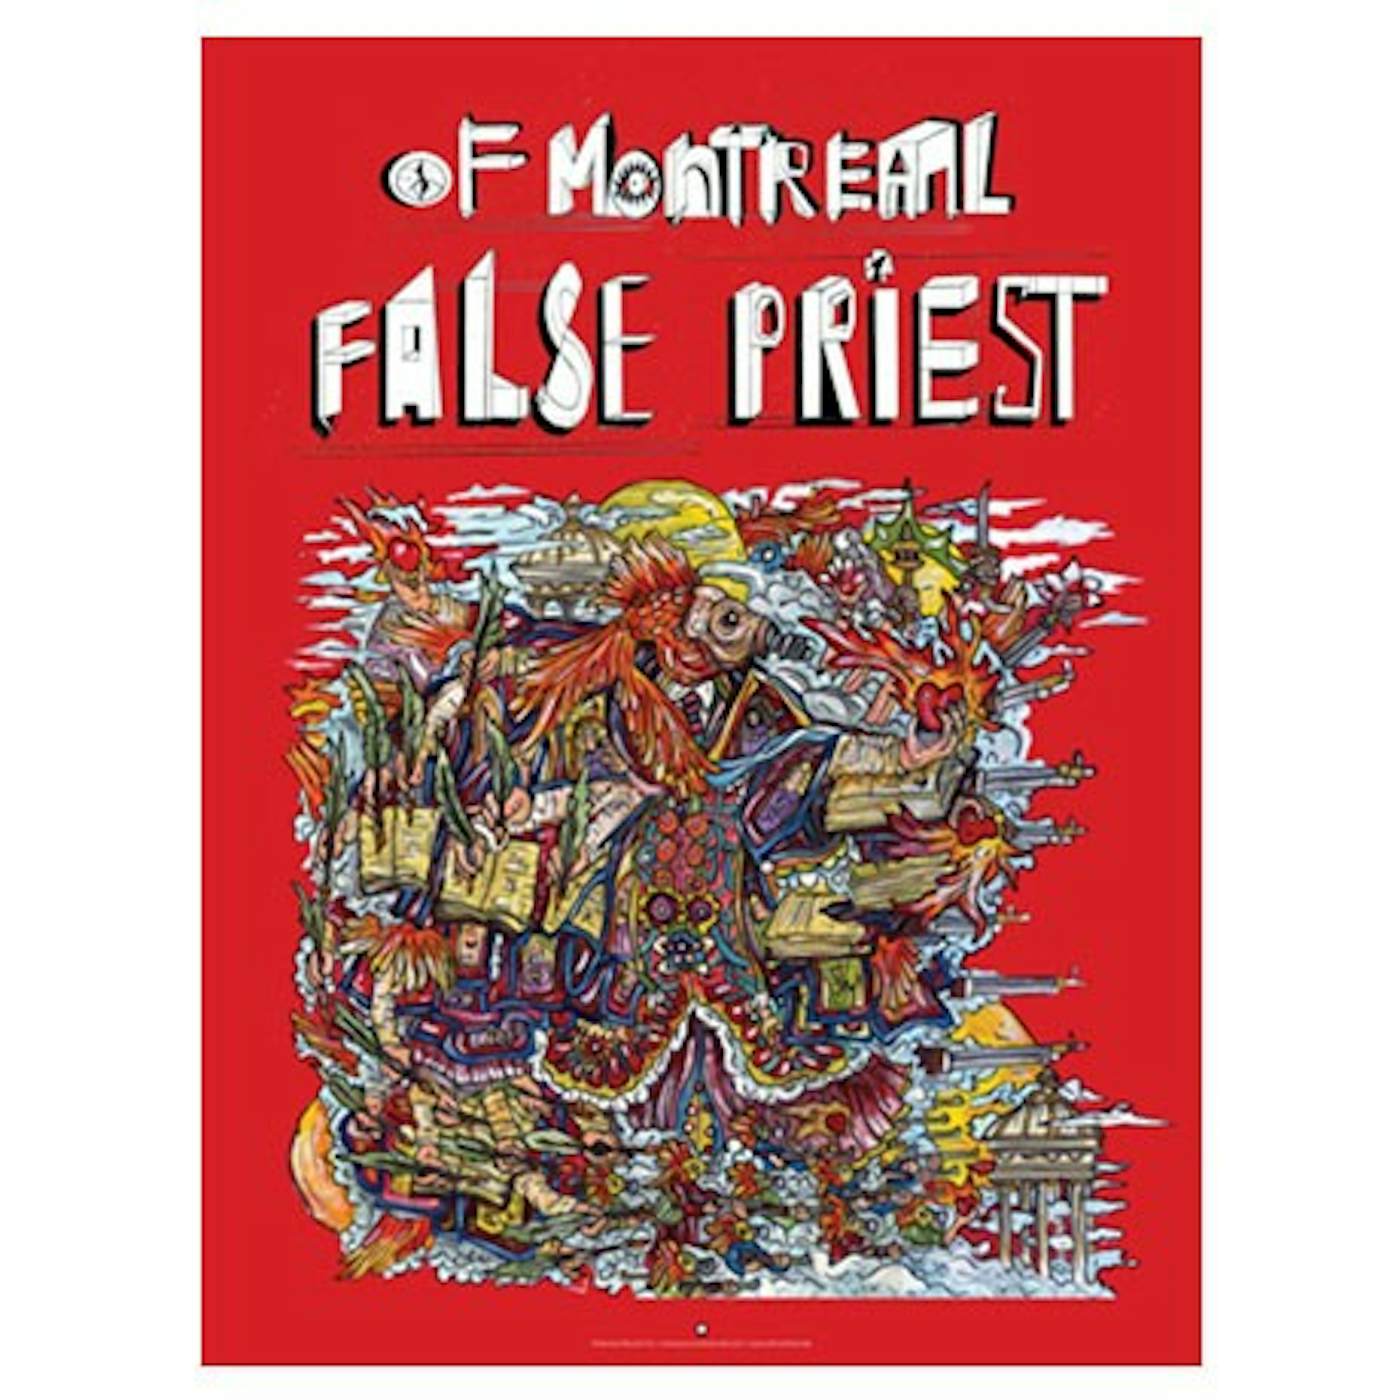 of Montreal False Priest Poster (18"x24")